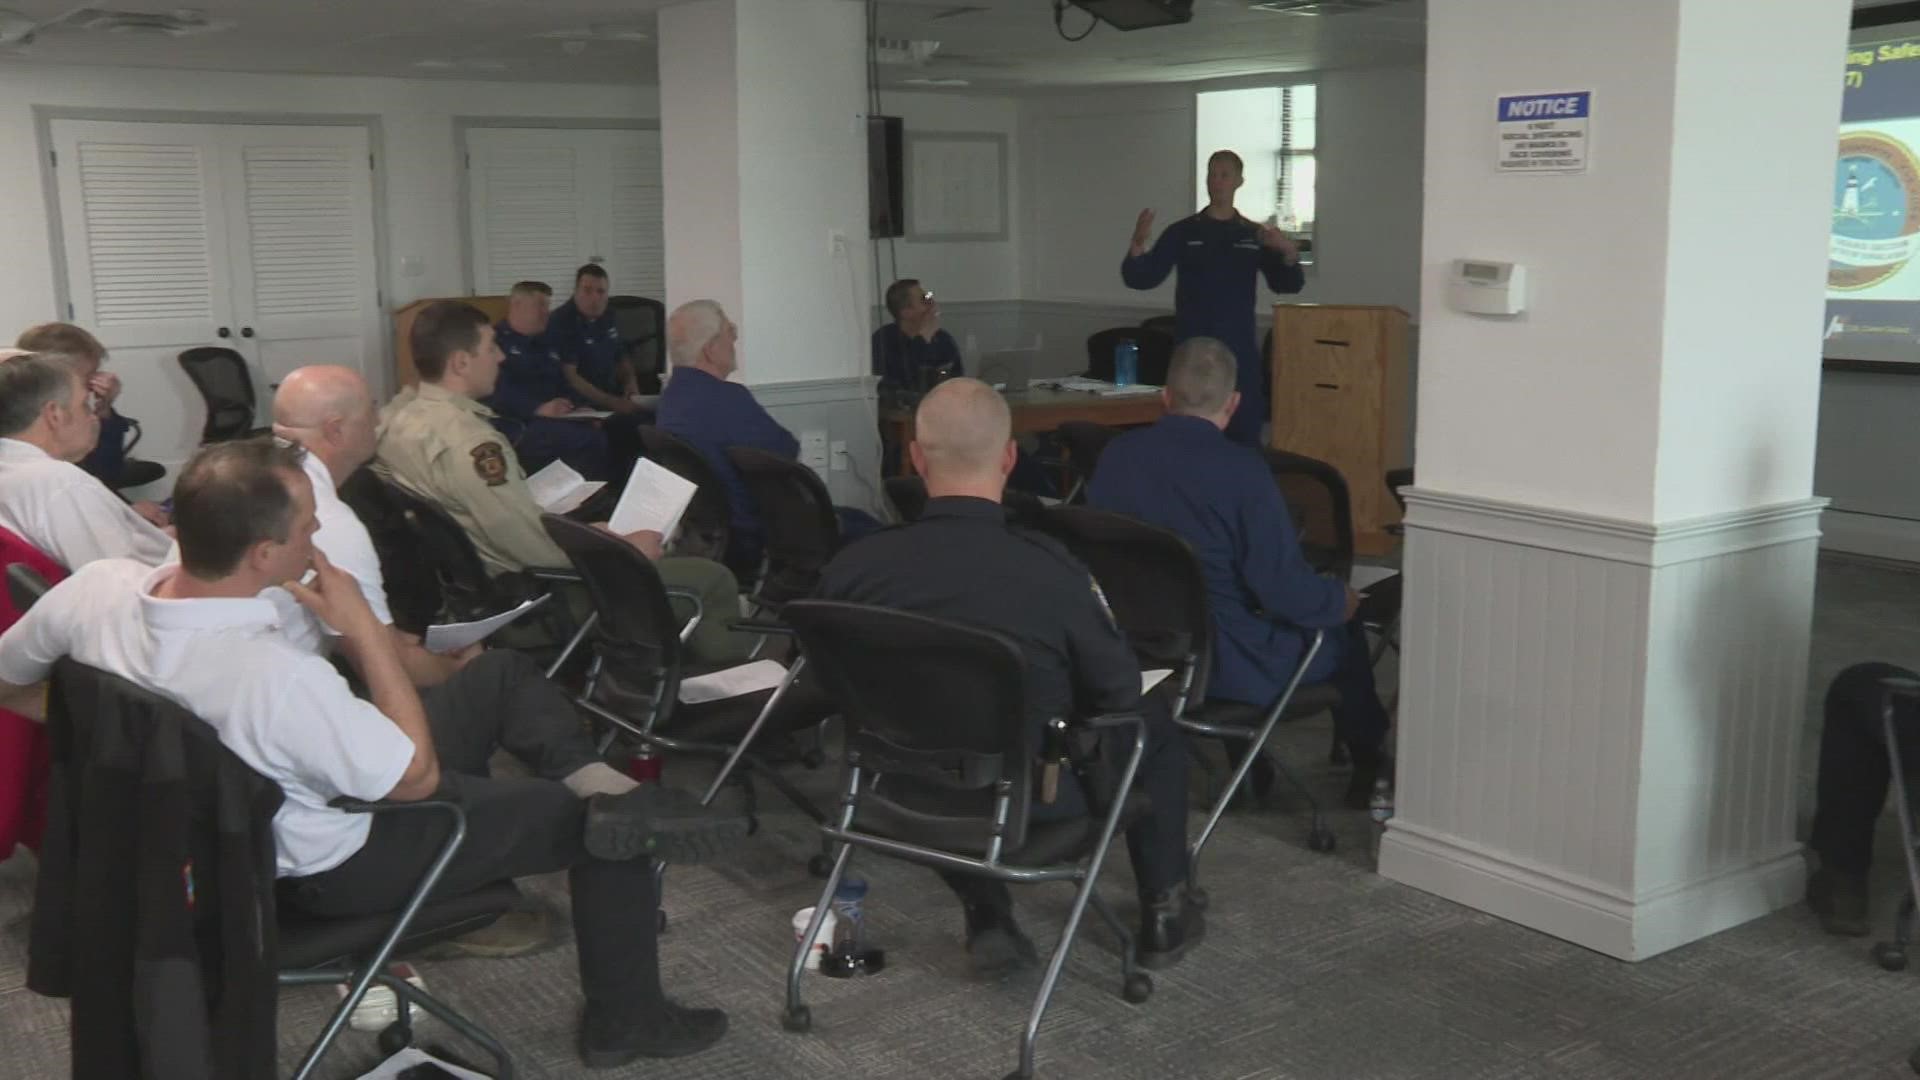 The U.S. Coast Guard Northern New England will be holding conferences on search and rescue and boating safety.